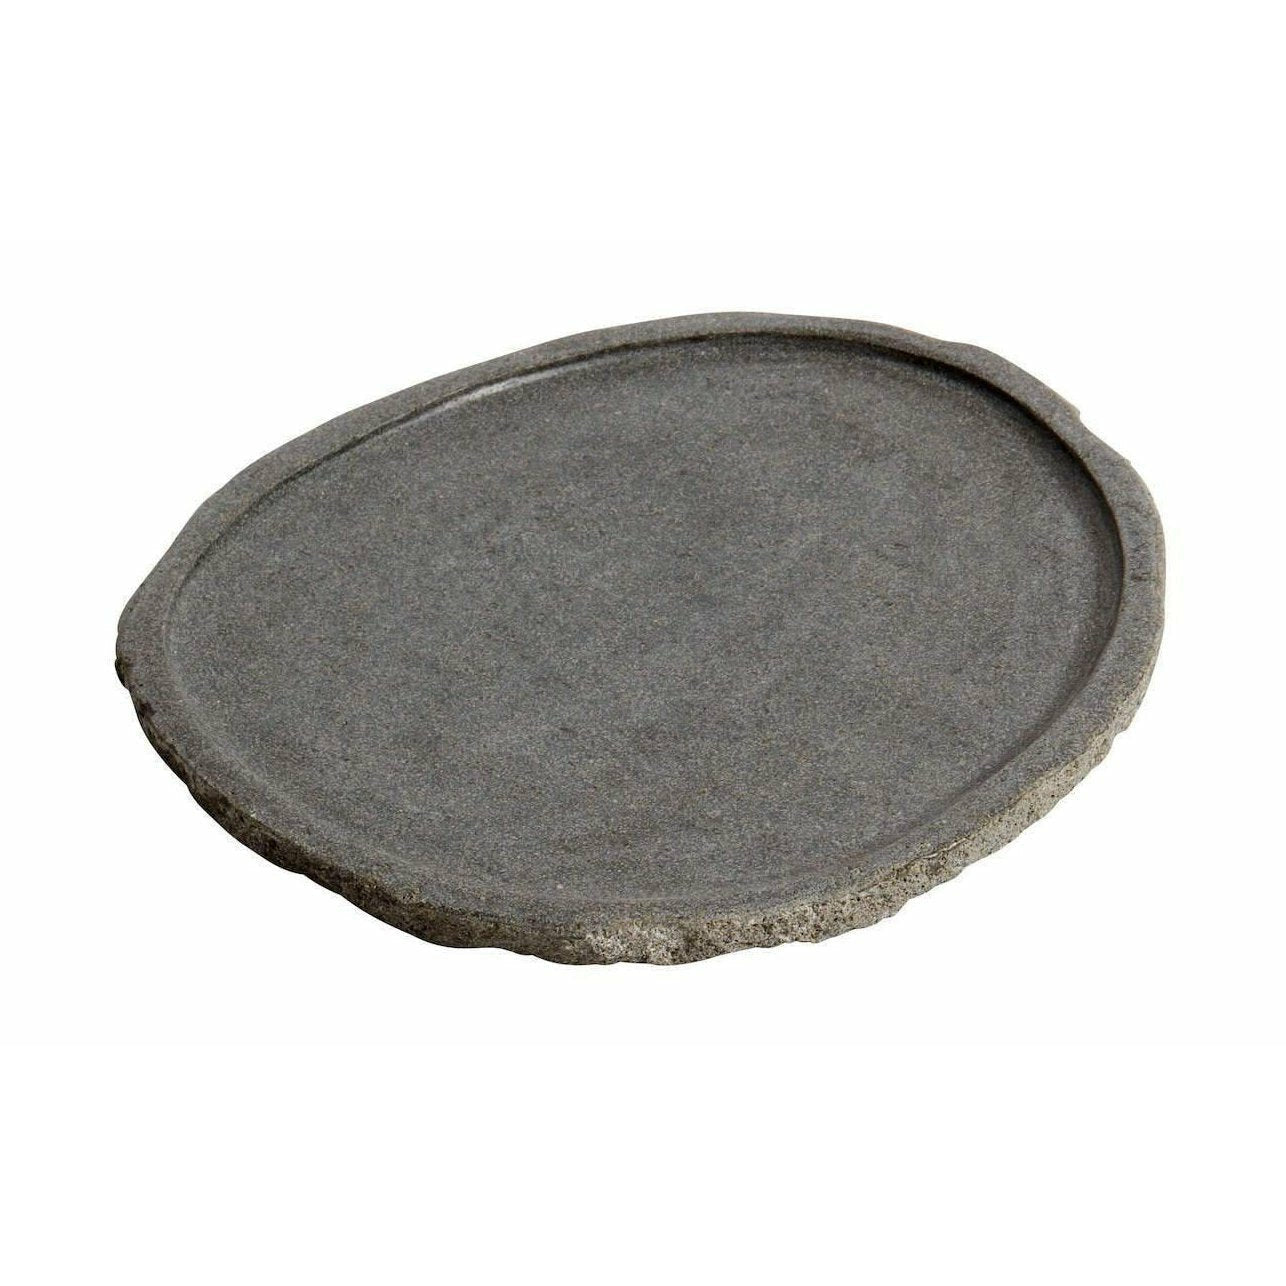 MUUBS Valley Fad Riverstone, 40 cm